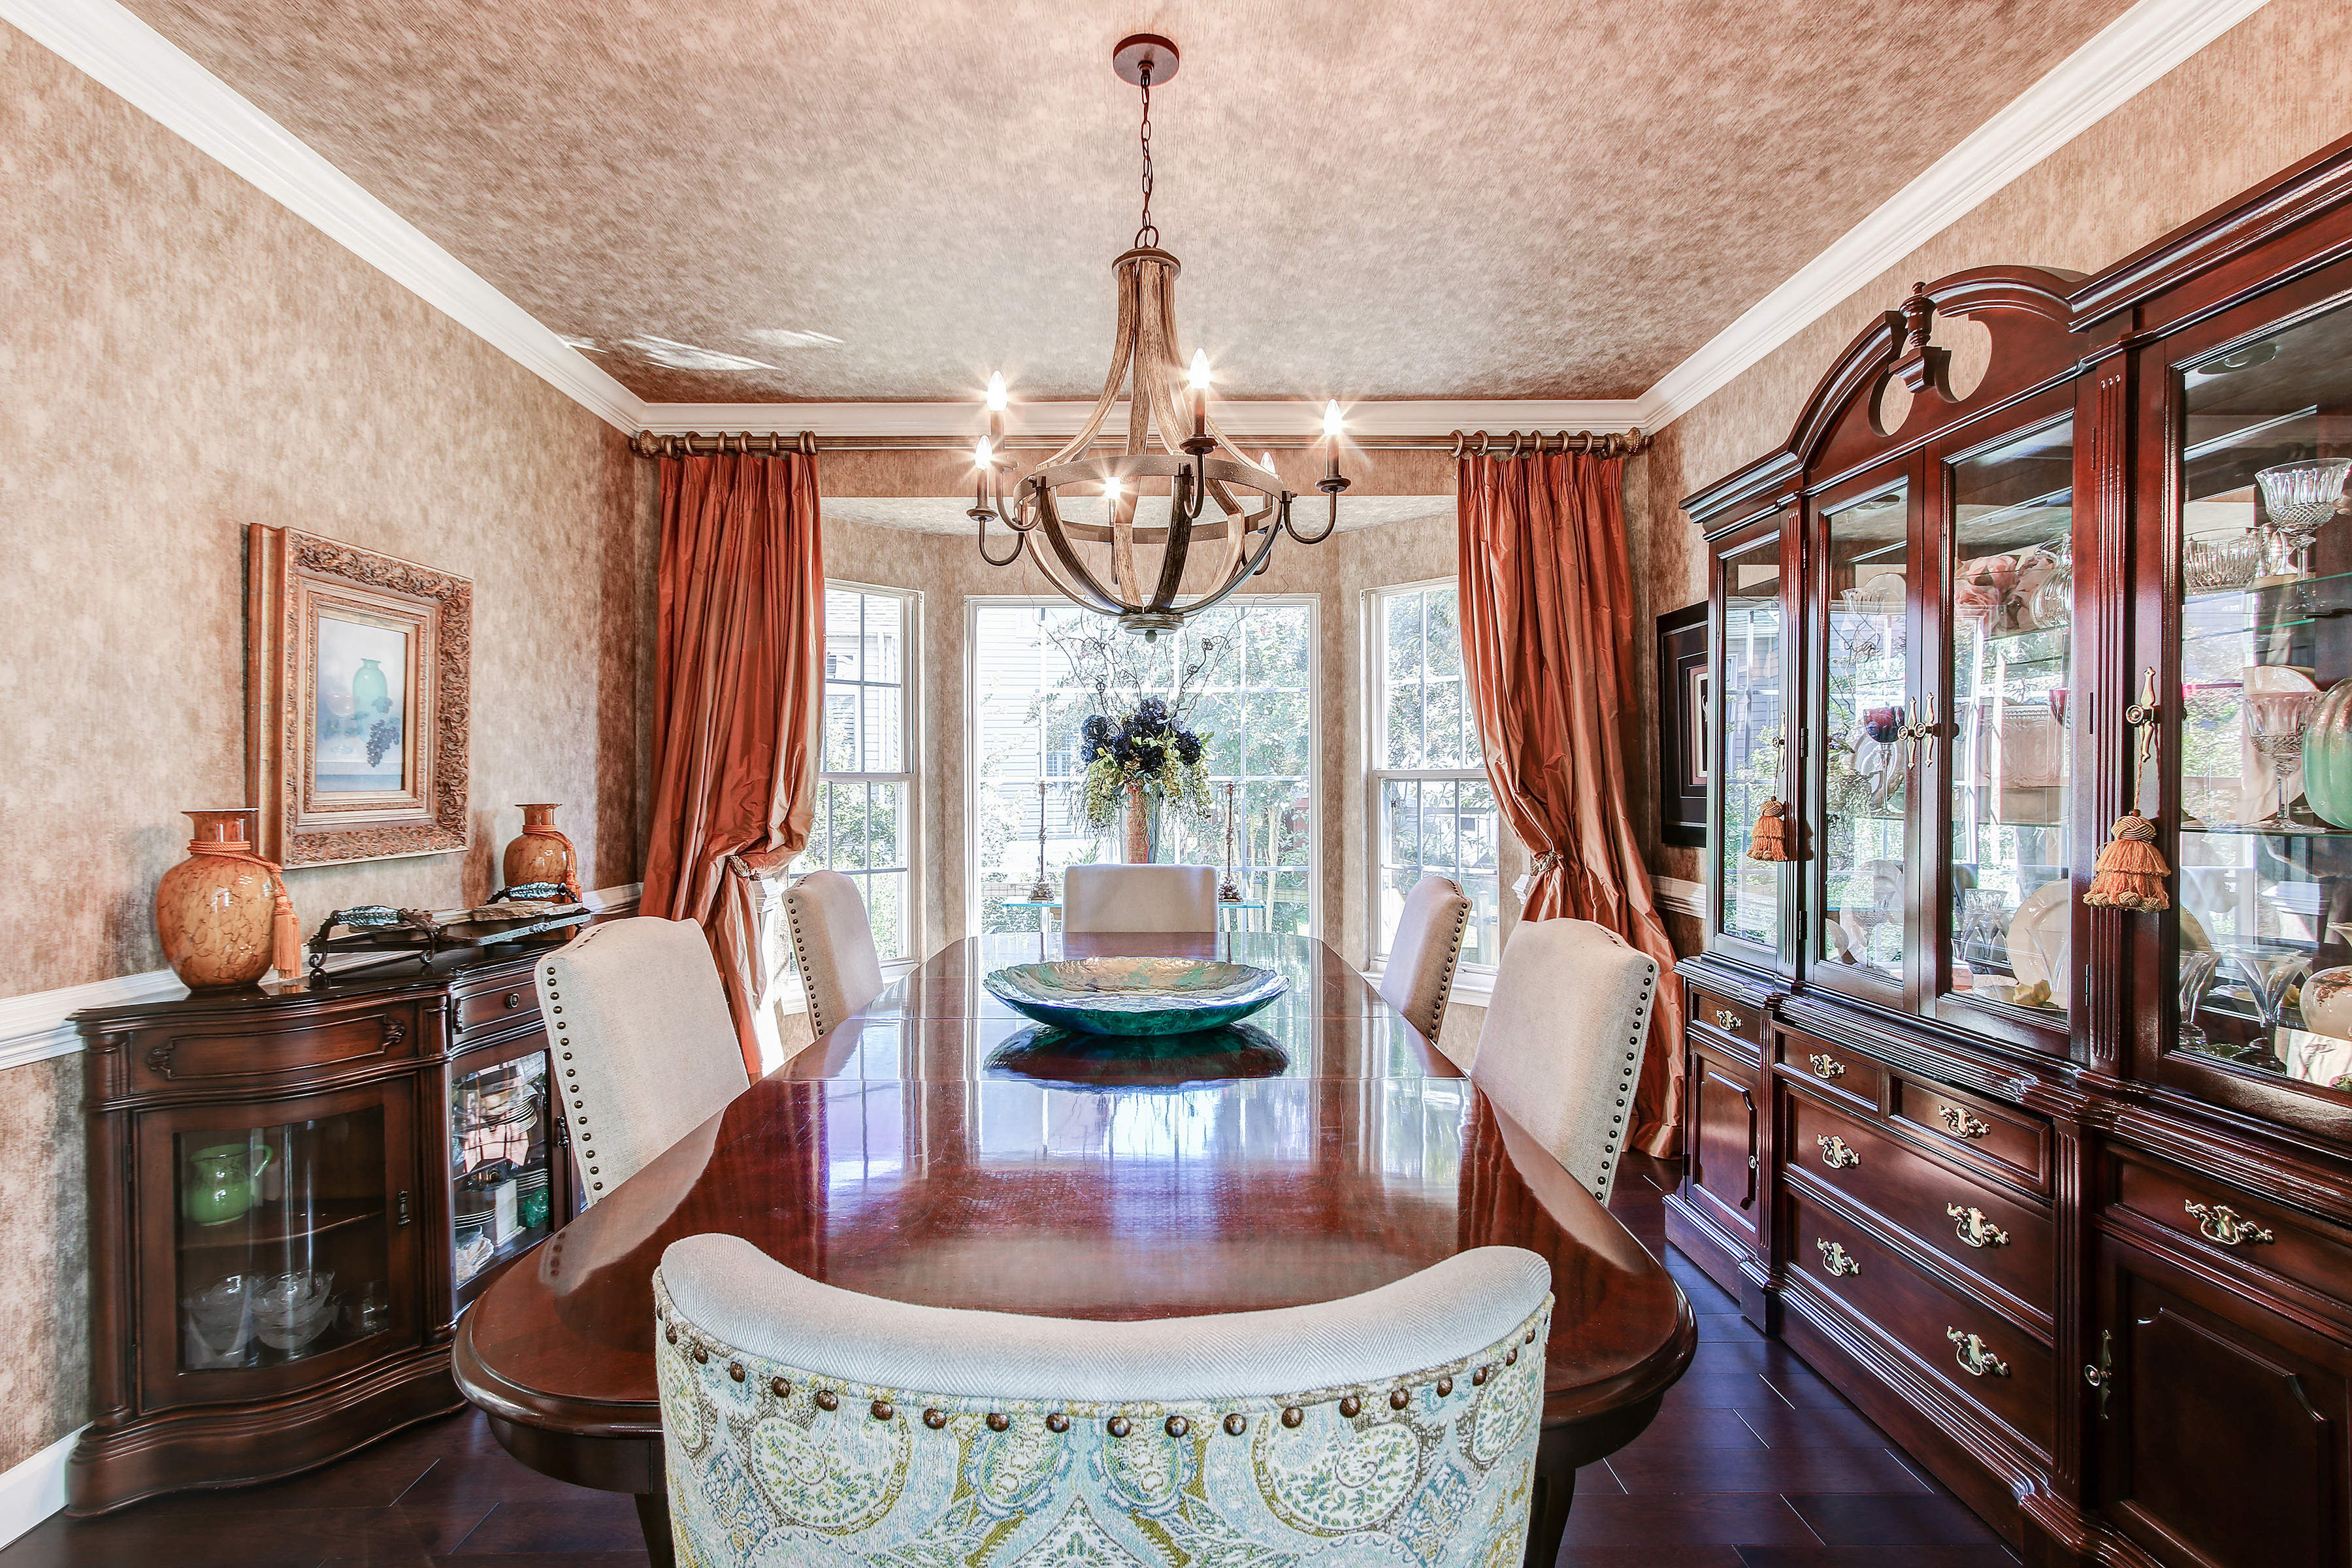 The dining room is classic with detailed design elements that have been customized for MQ and her space.